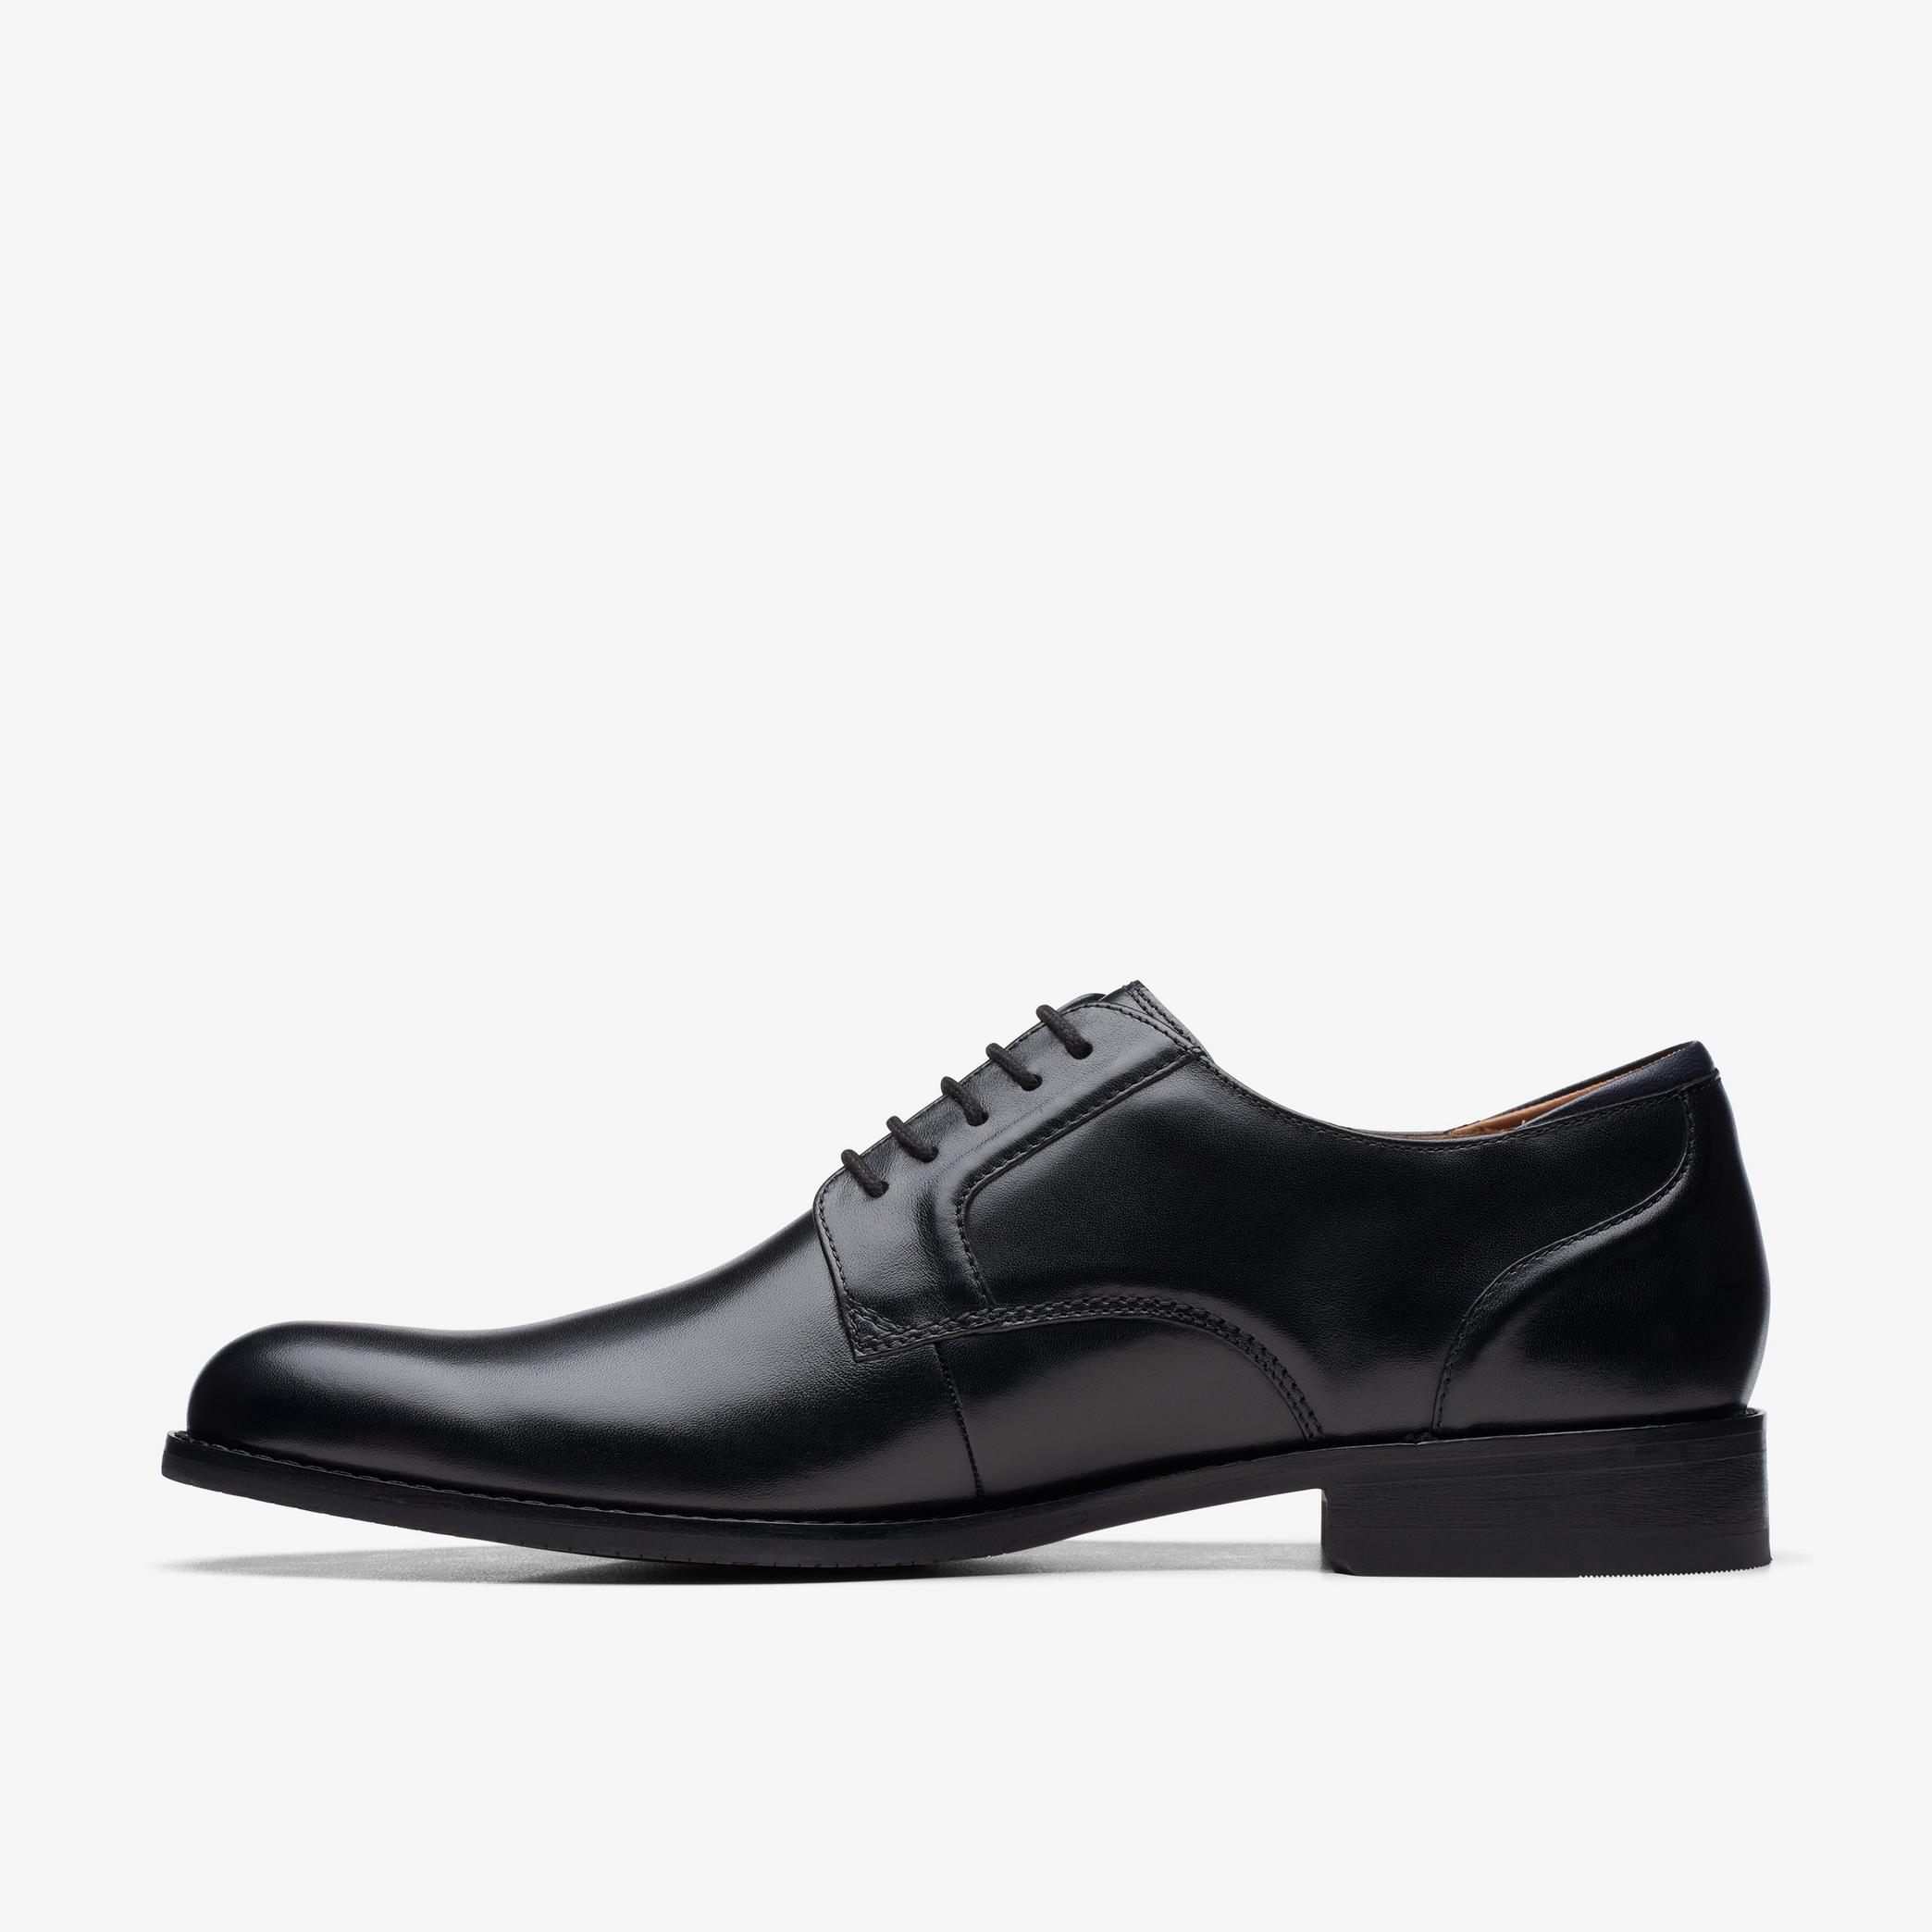 Craft Arlo Lace Black Leather Oxford Shoes, view 2 of 6